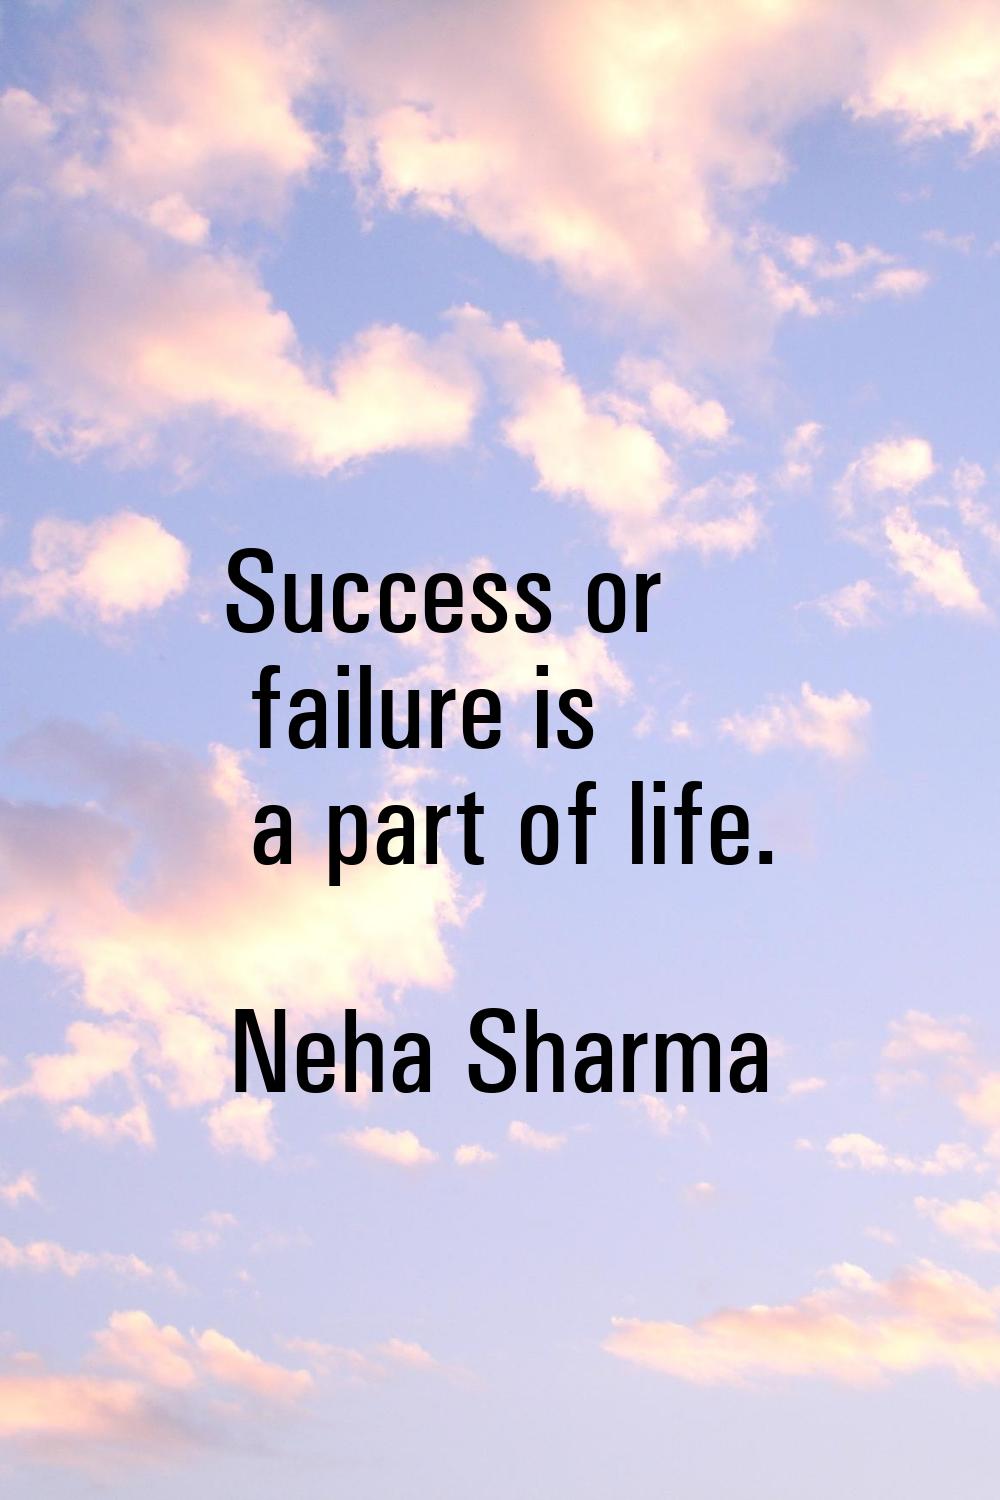 Success or failure is a part of life.